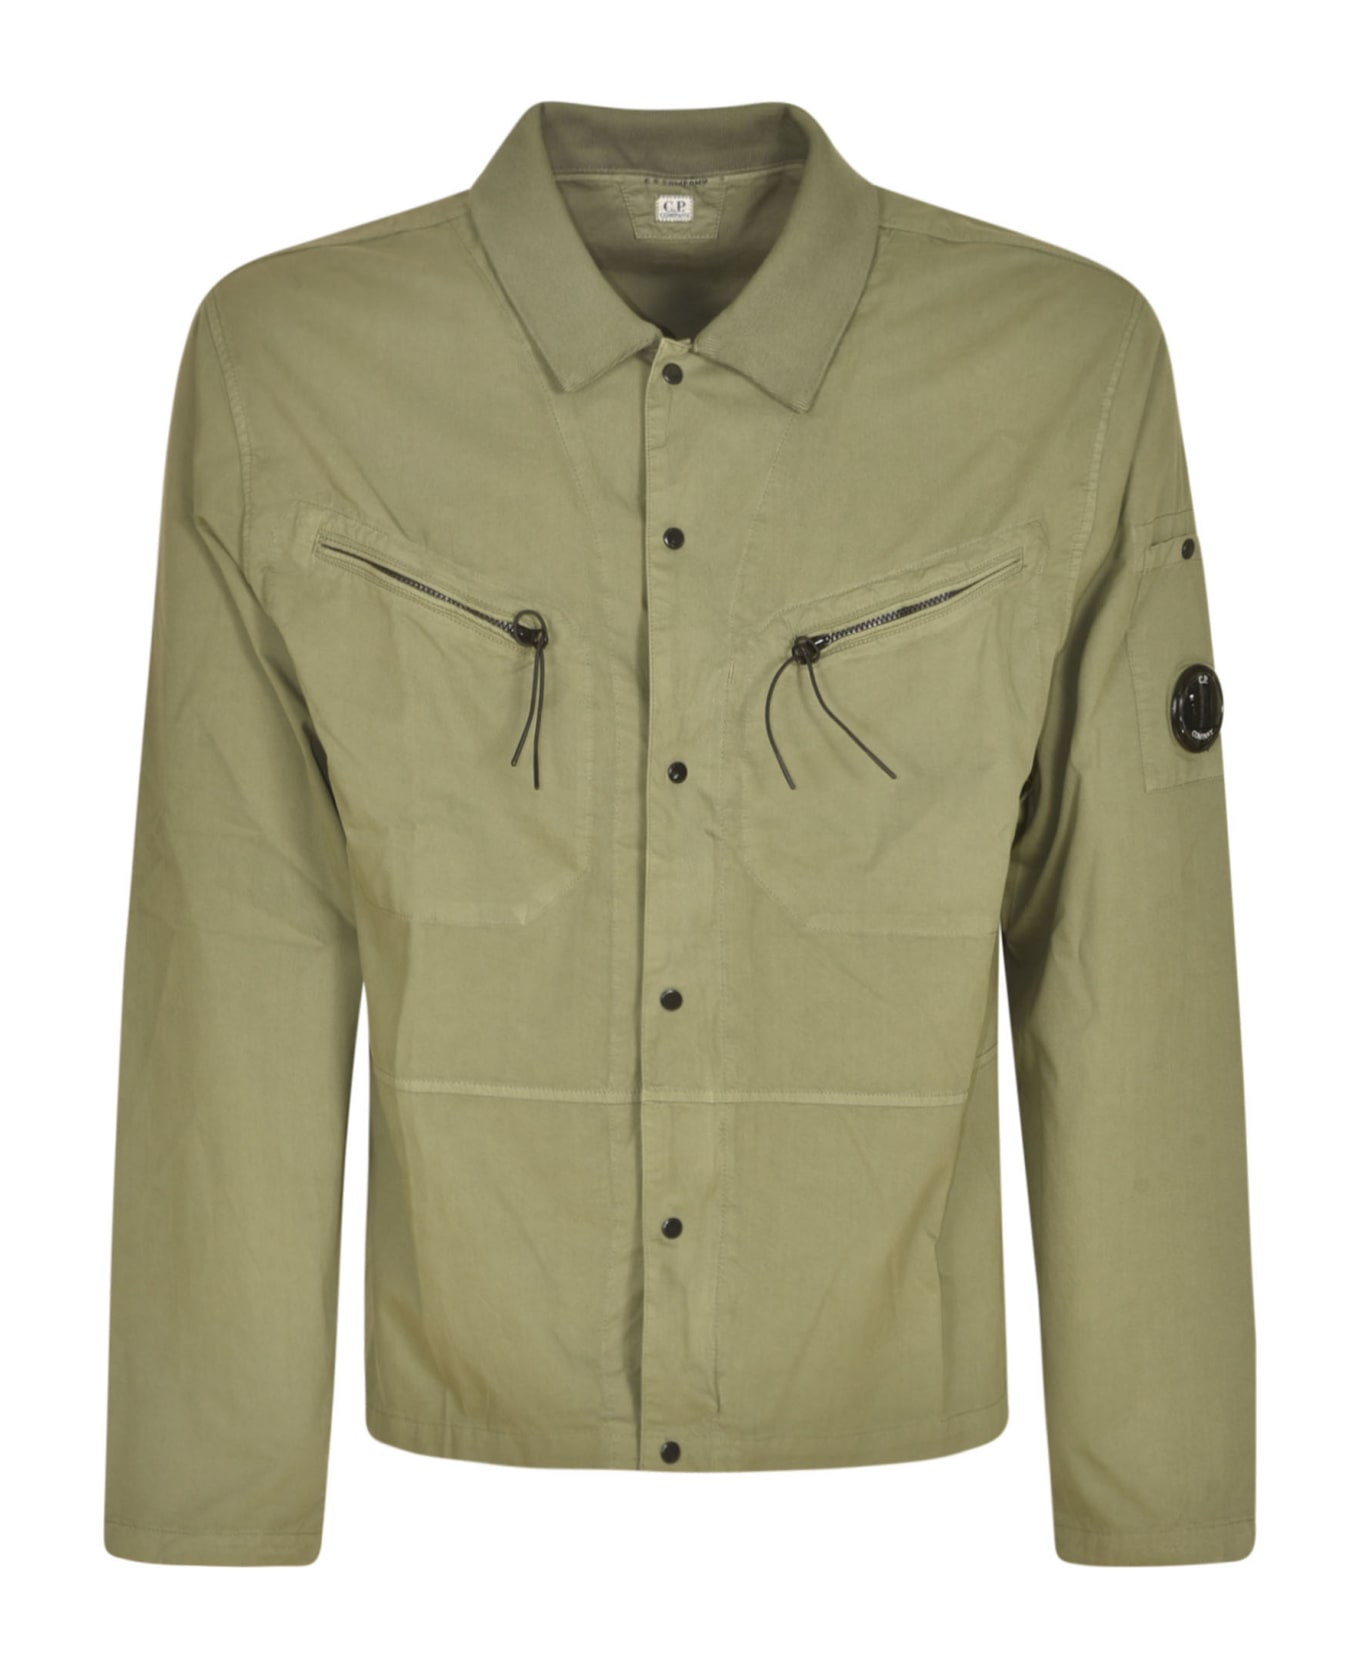 C.P. Company Classic Long-sleeved Shirt - Agave